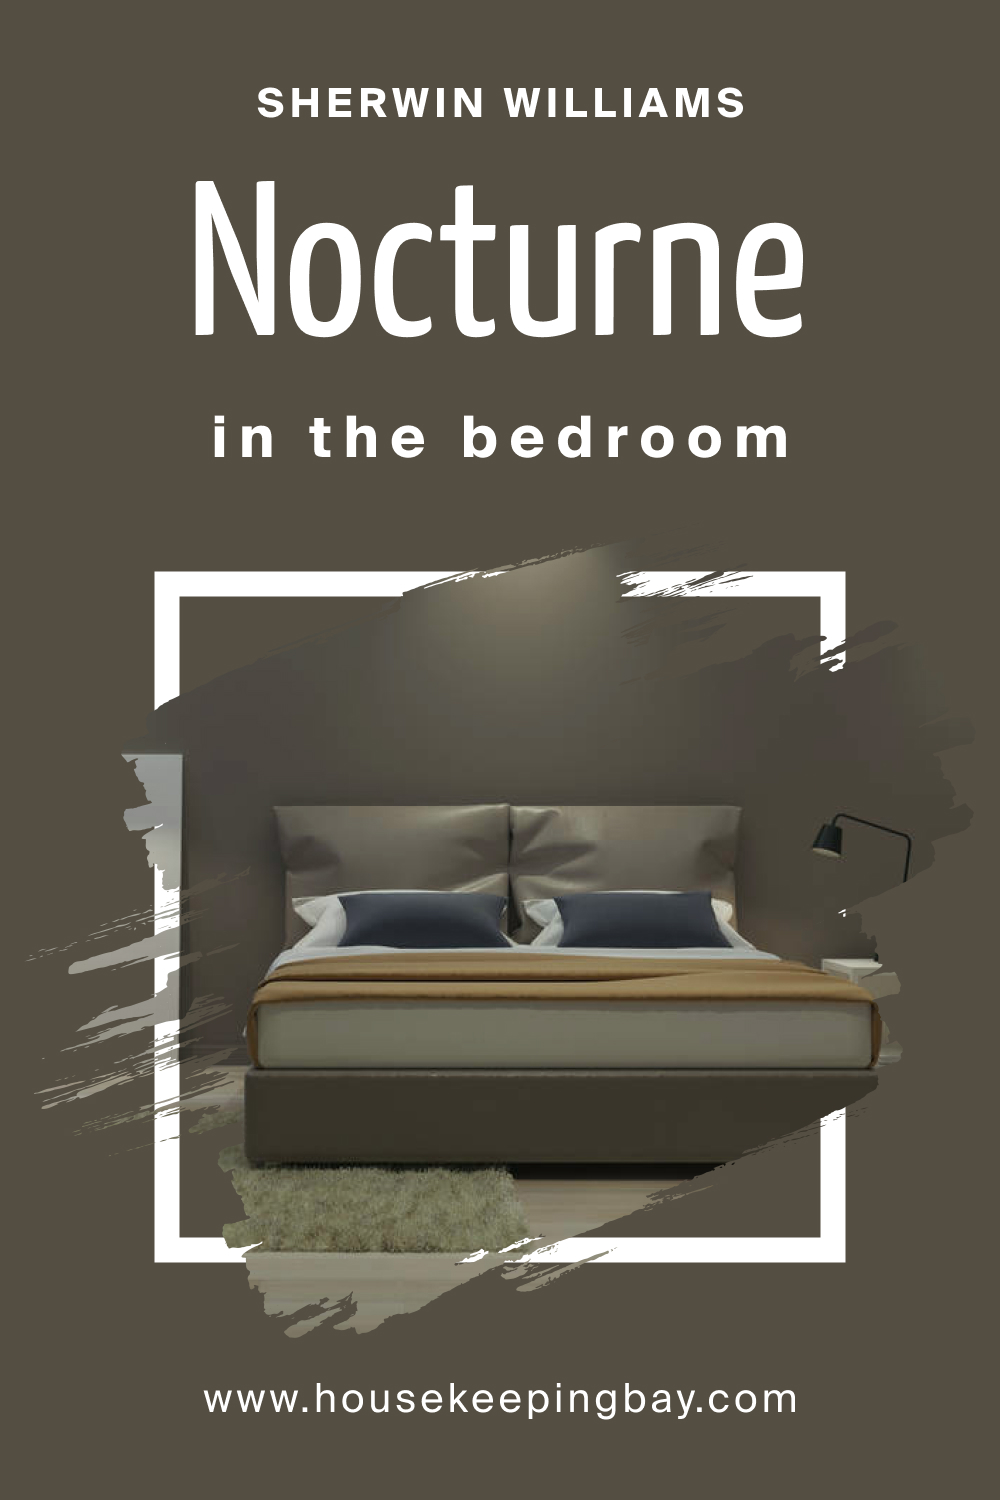 Sherwin Williams. SW 9520 Nocturne For the bedroom